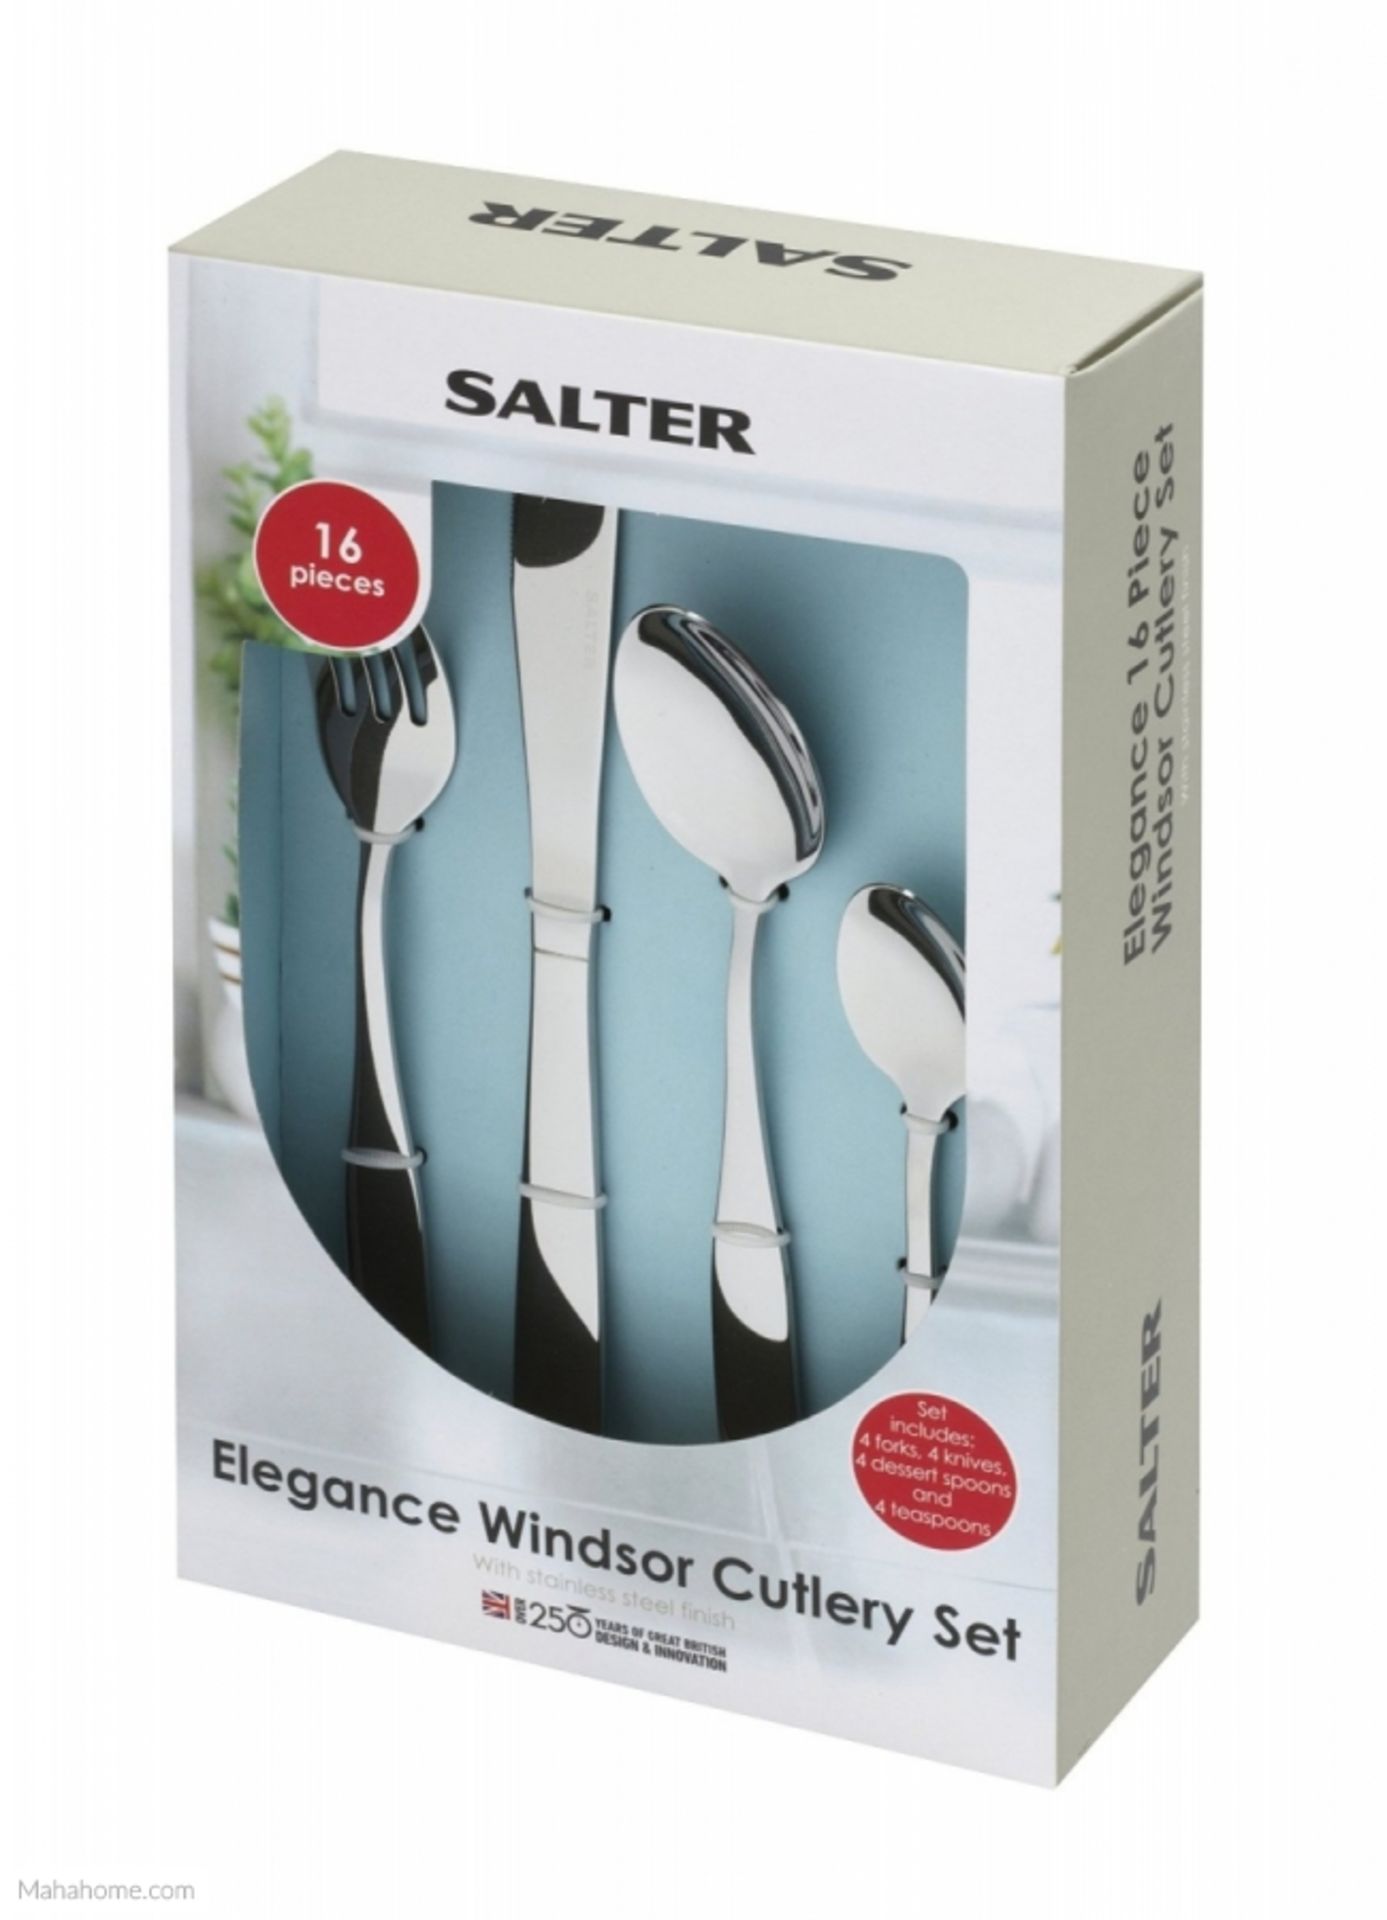 V Brand New Salter 16 Piece Stainless Steel Windsor Cutlery Set - ISP £29.99 (Mahahome.com)